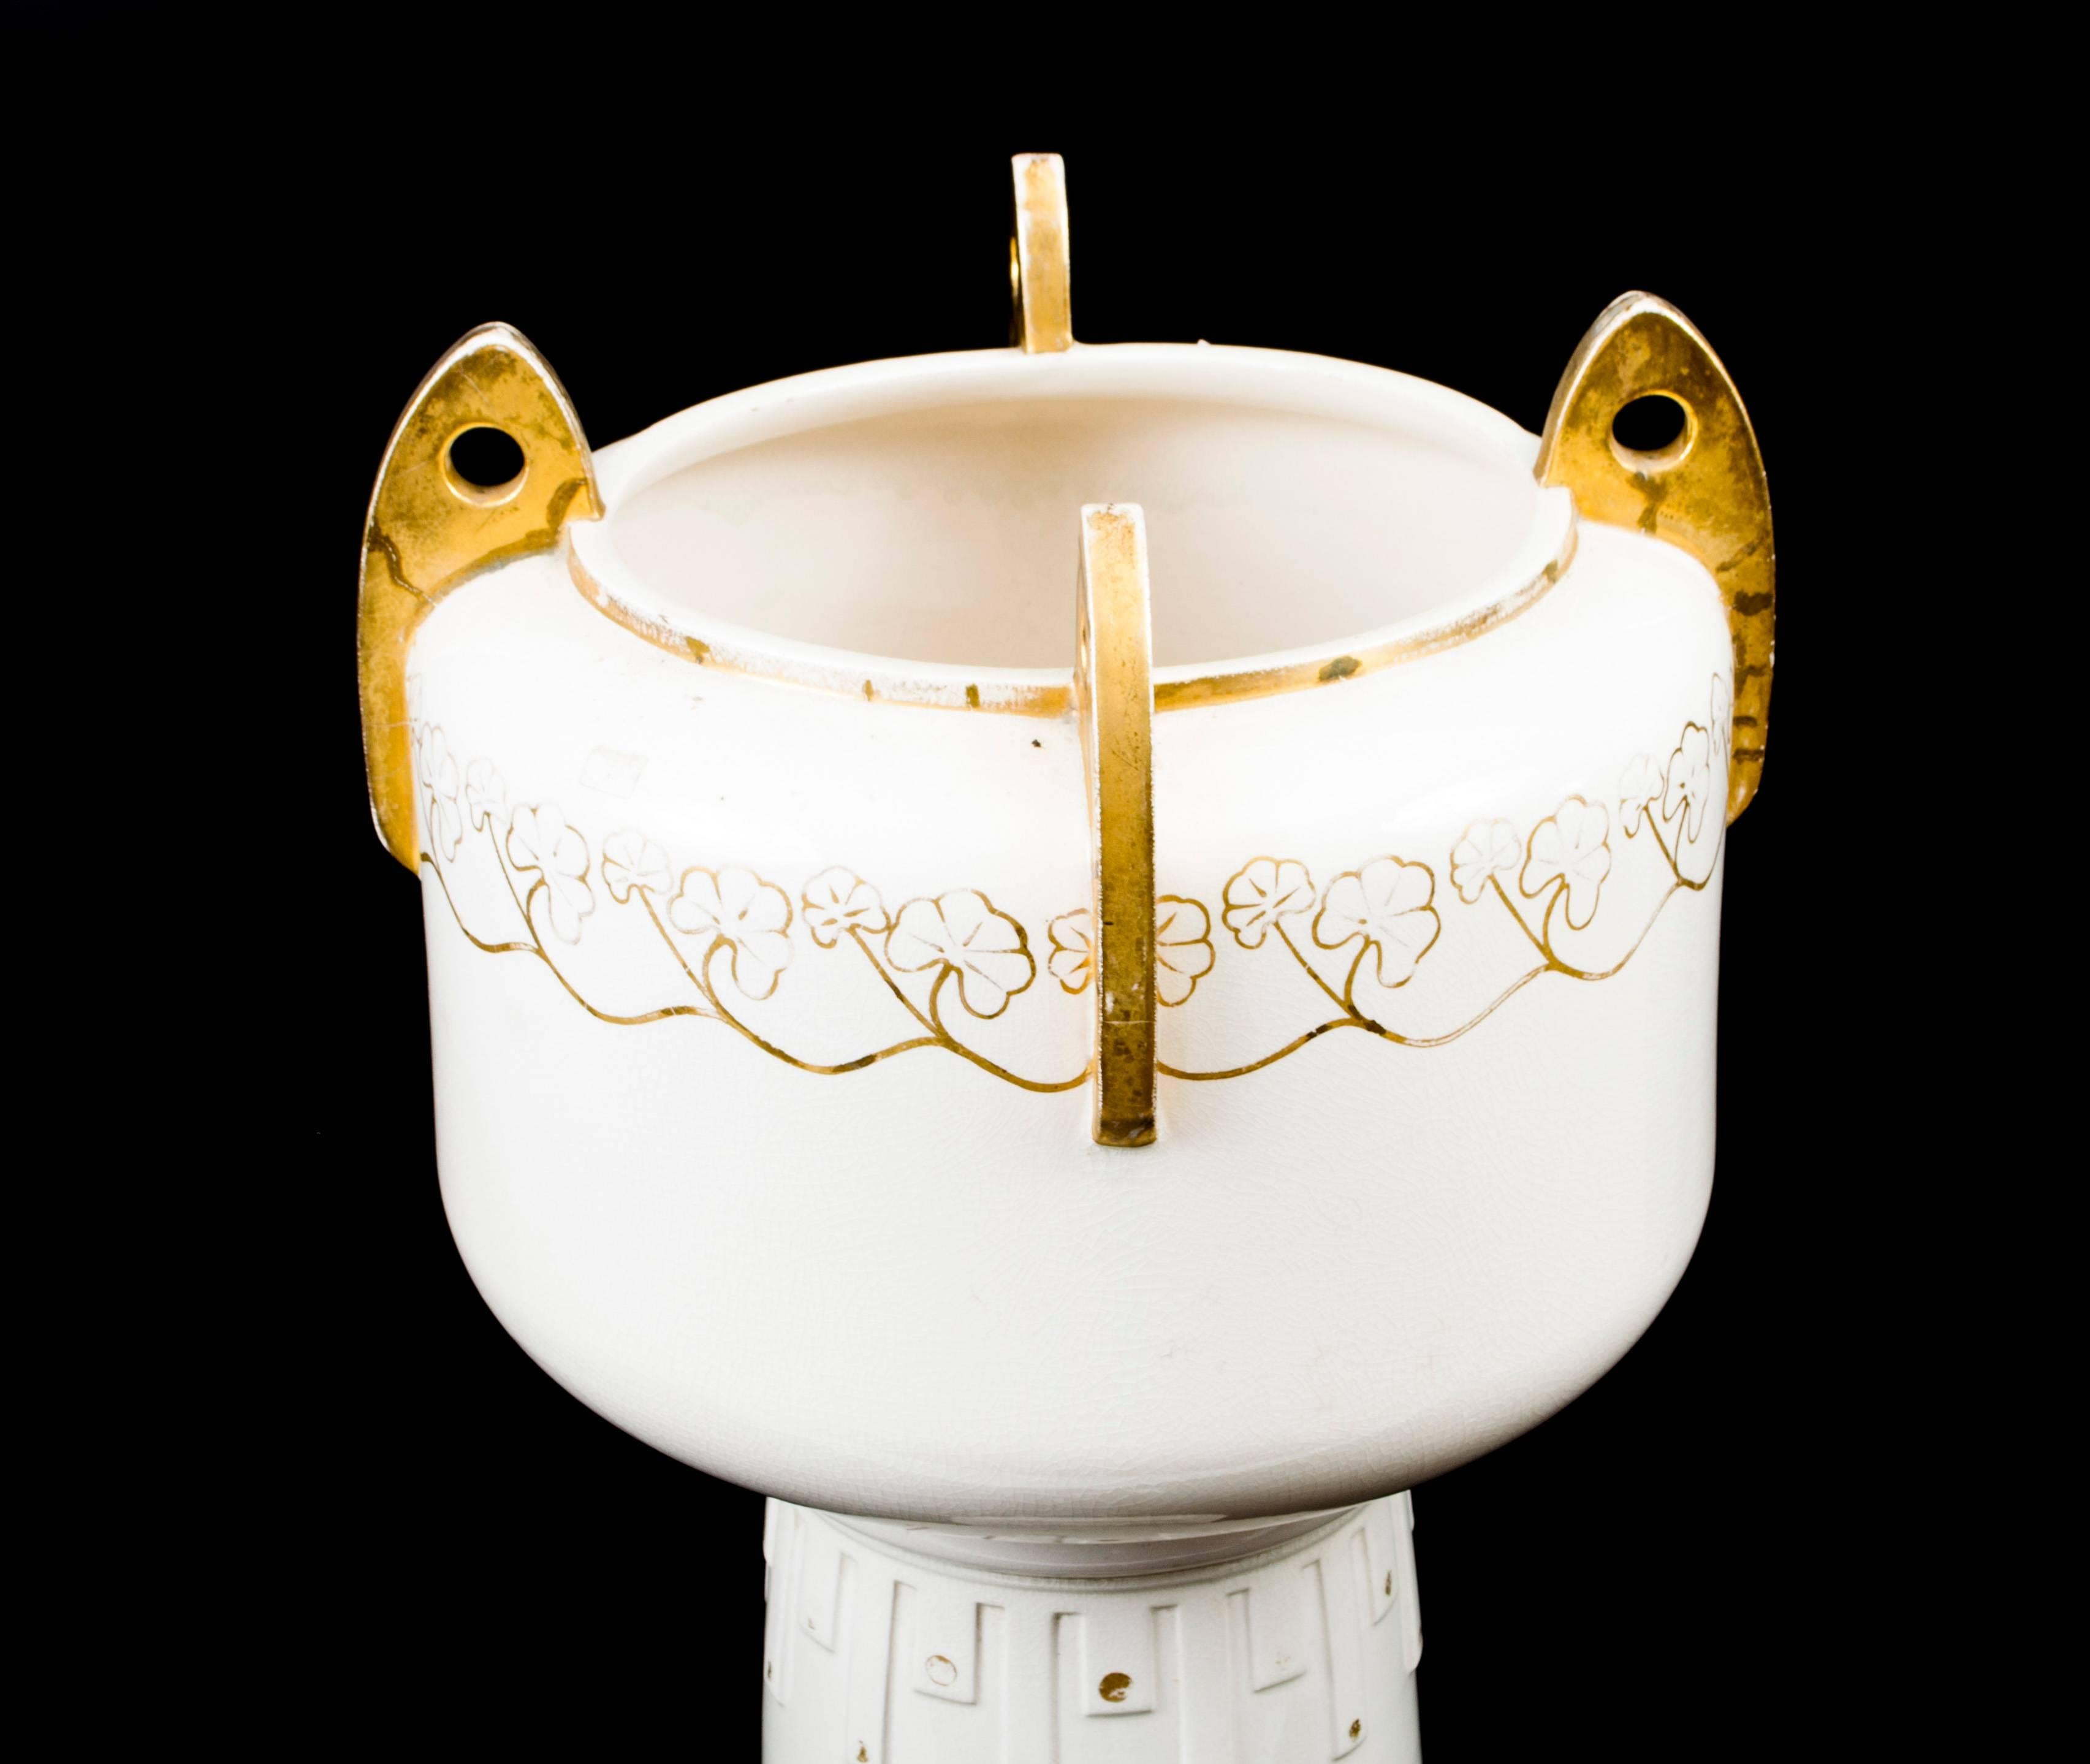 This is a beautiful antique Art Deco jardinière on stand, 1926 in date.

There is a gilded M hallmark on the underside of the jardinière which indicates that this is Minton Porcelain.

It has its original gilded decoration.

It is in excellent